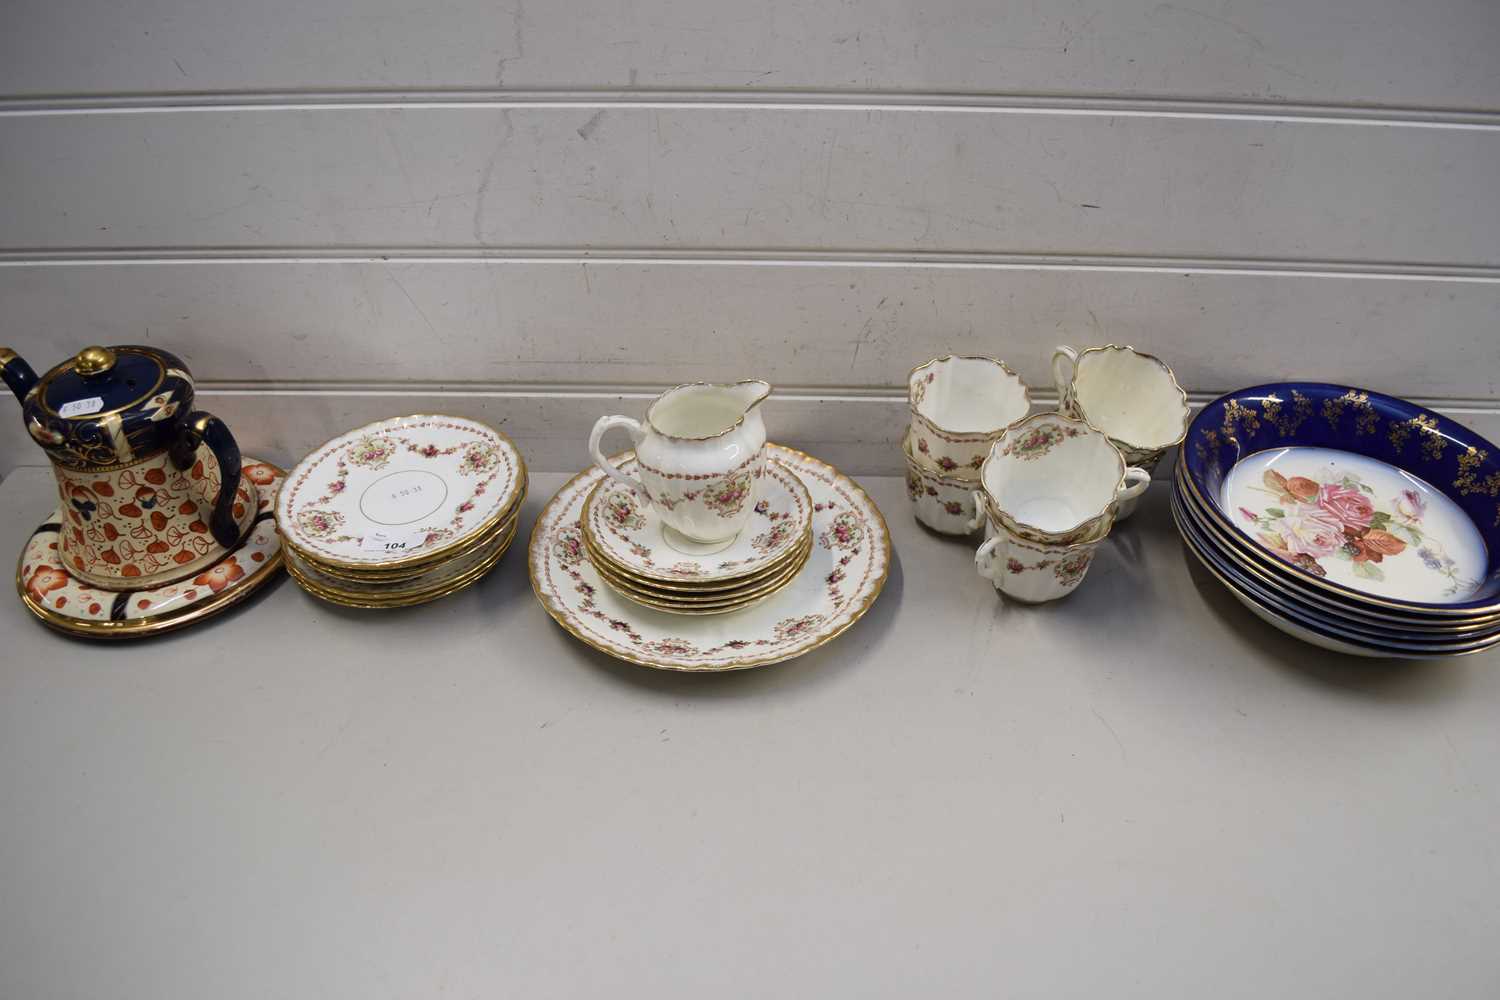 MIXED LOT VARIOUS CERAMICS TO INCLUDE EDWARDIAN TEA WARES, FLORAL DECORATED BOWLS AND OTHER ITEMS